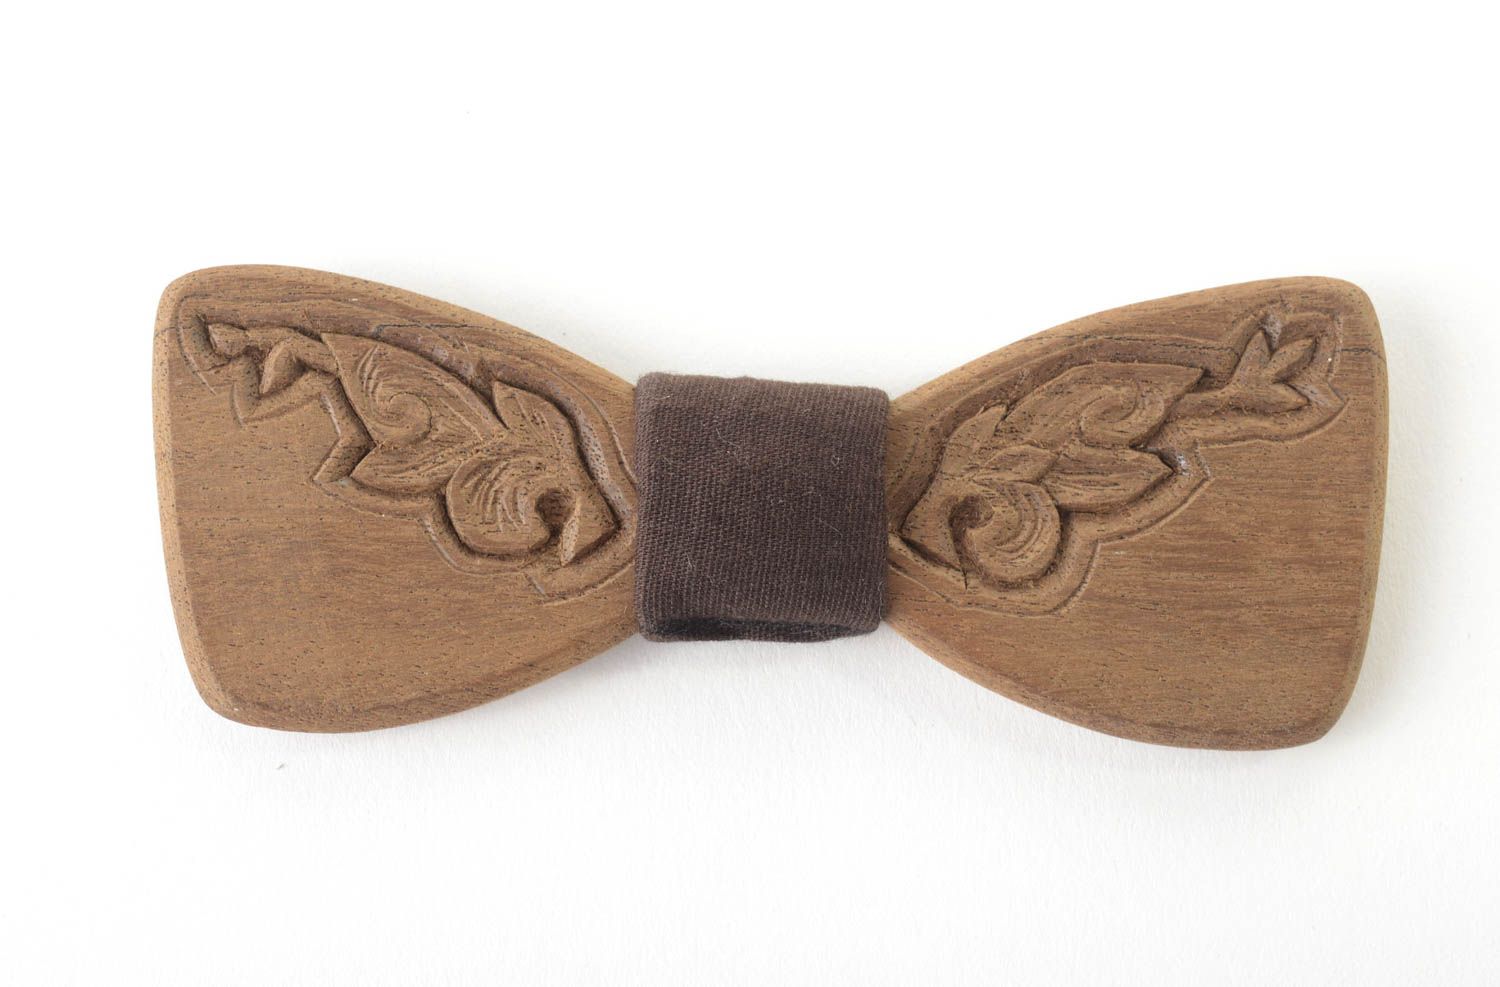 Handmade bow tie wooden bow tie designer accessories for men gifts for boys photo 4